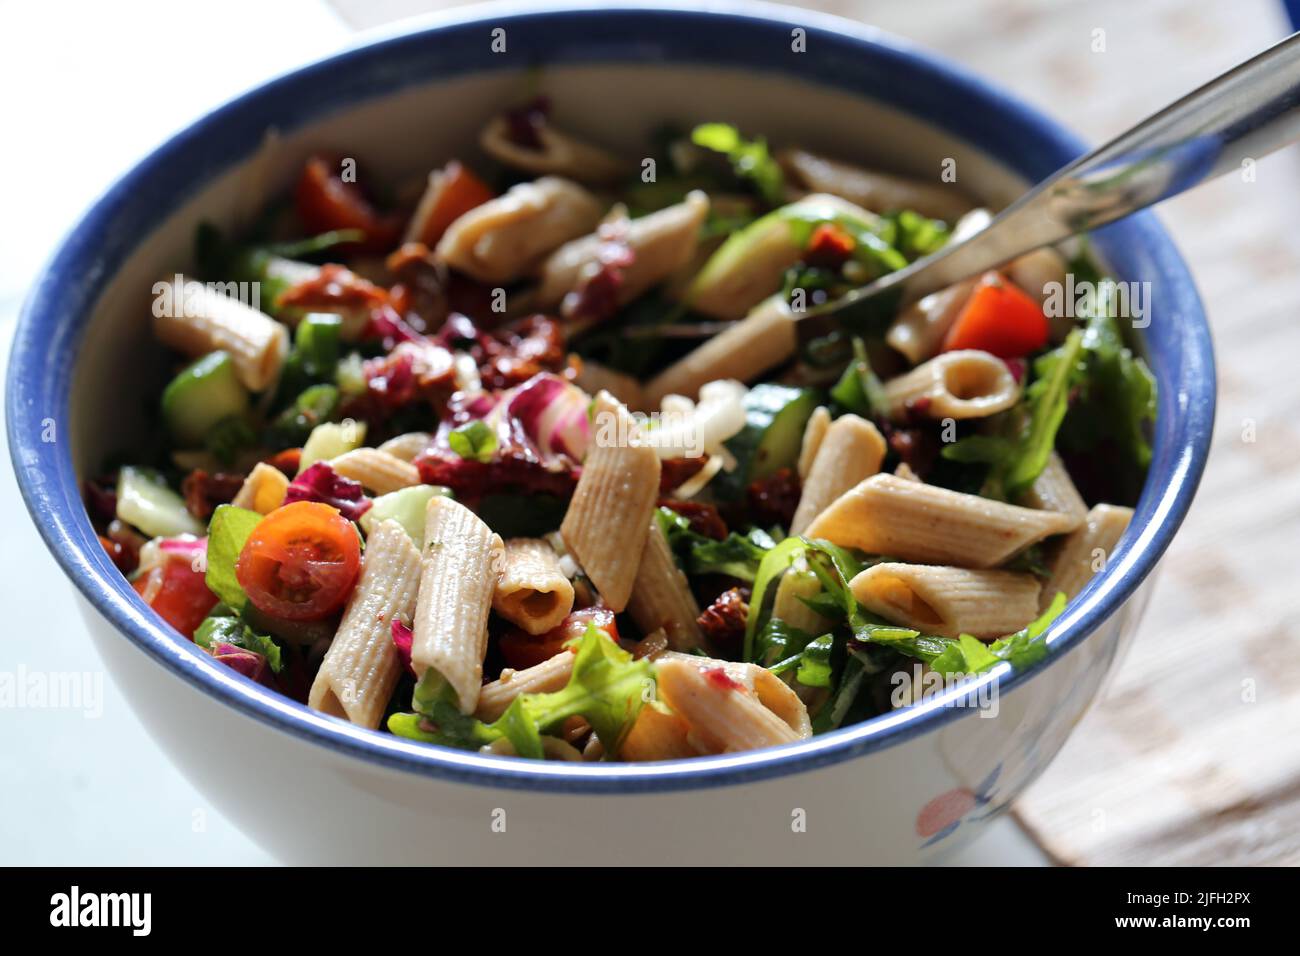 Homemade delicious pasta salad with some pasta and different vegetables. DIY healthy food in a bowl on a table in a Finnish summer cottage, eating out Stock Photo